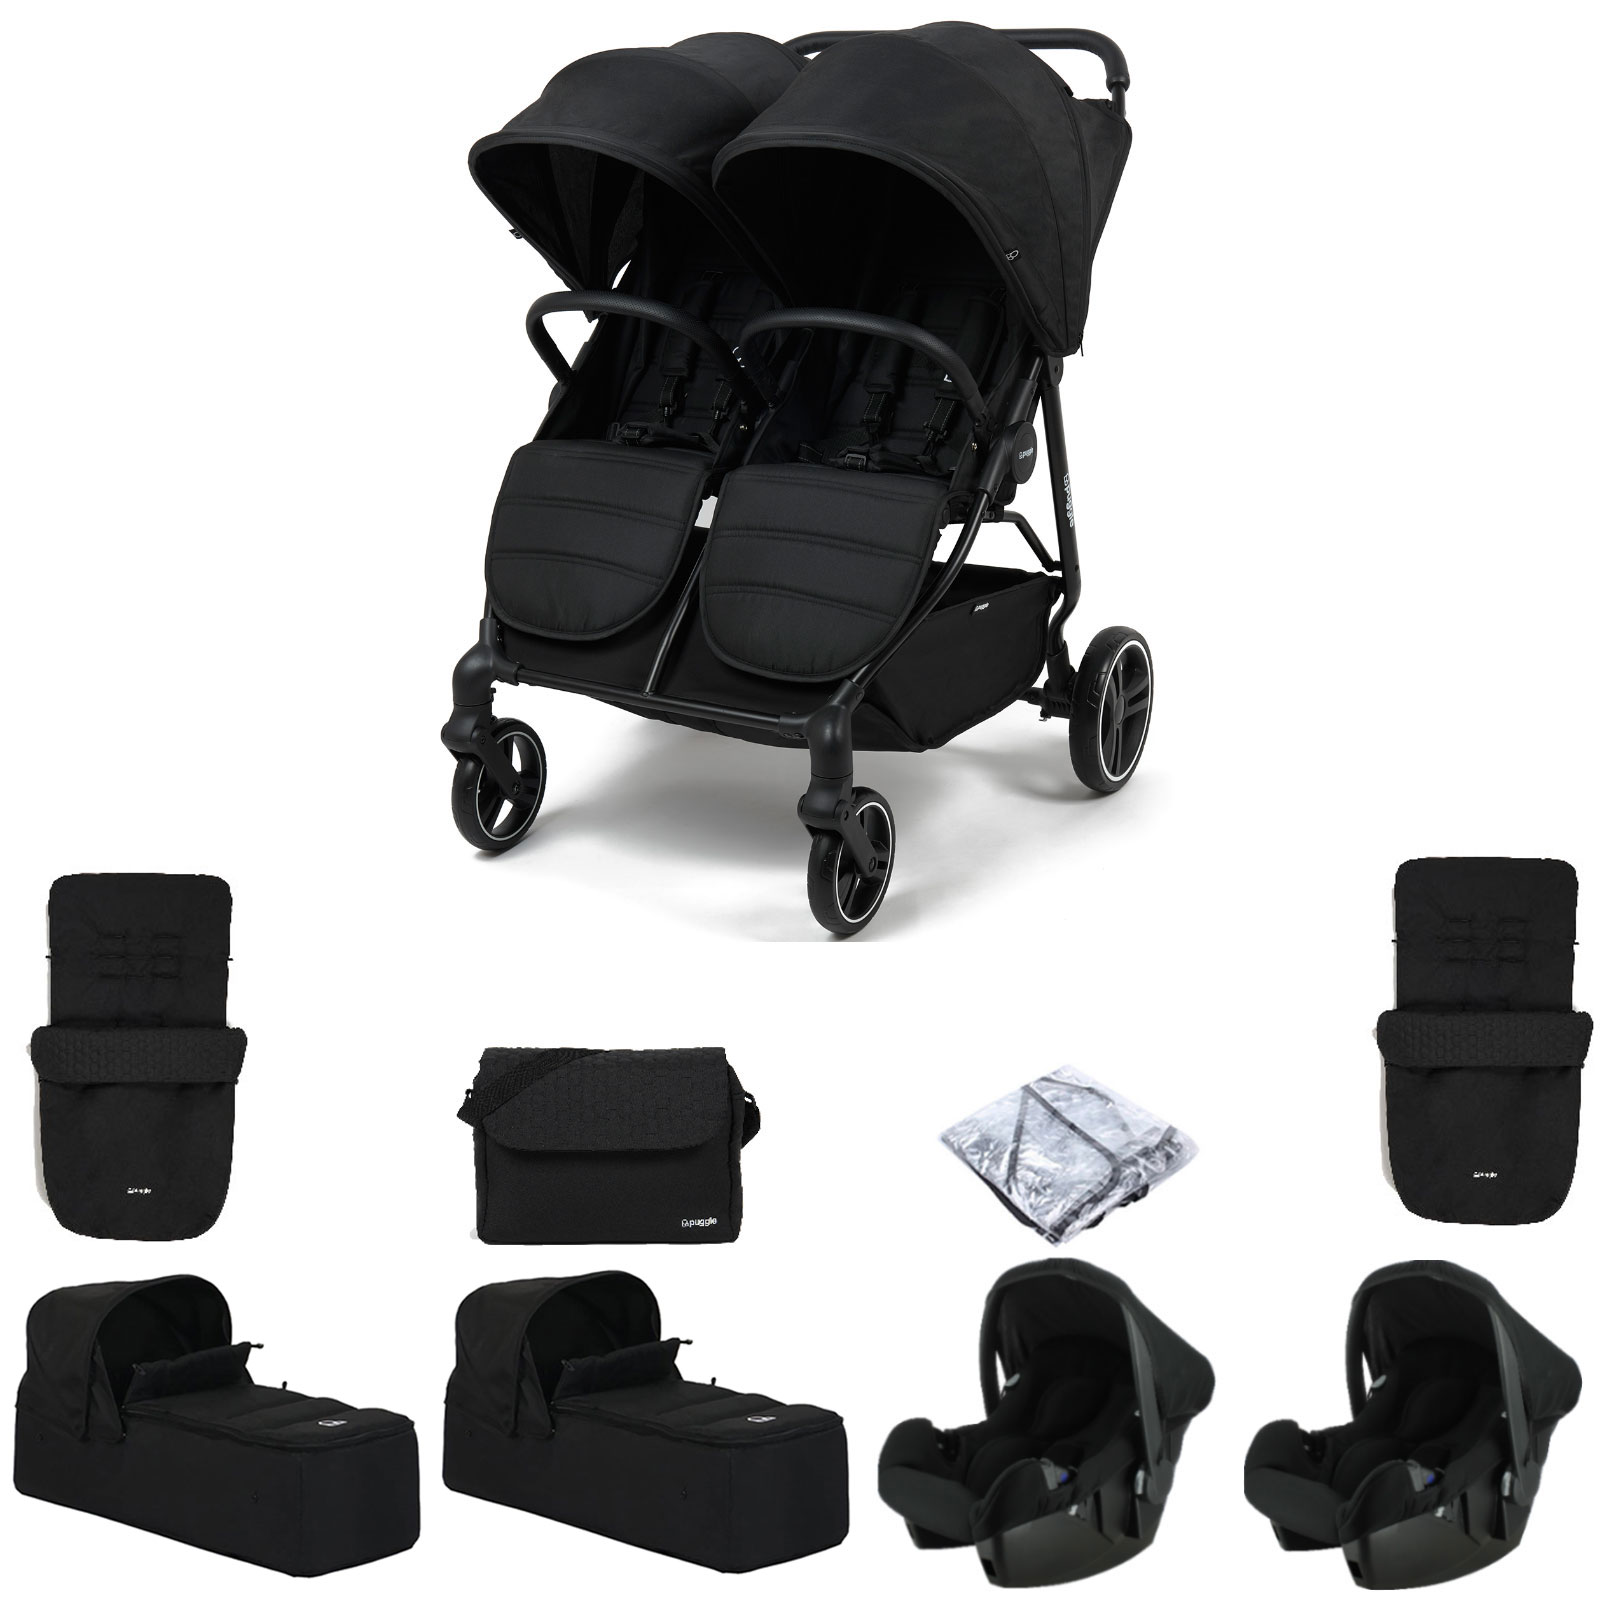 Puggle Urban City Easyfold Twin Pushchair with 2 Beone Car Seats, 2 Carrycots, 2 Footmuffs & Changing Bag – Storm Black